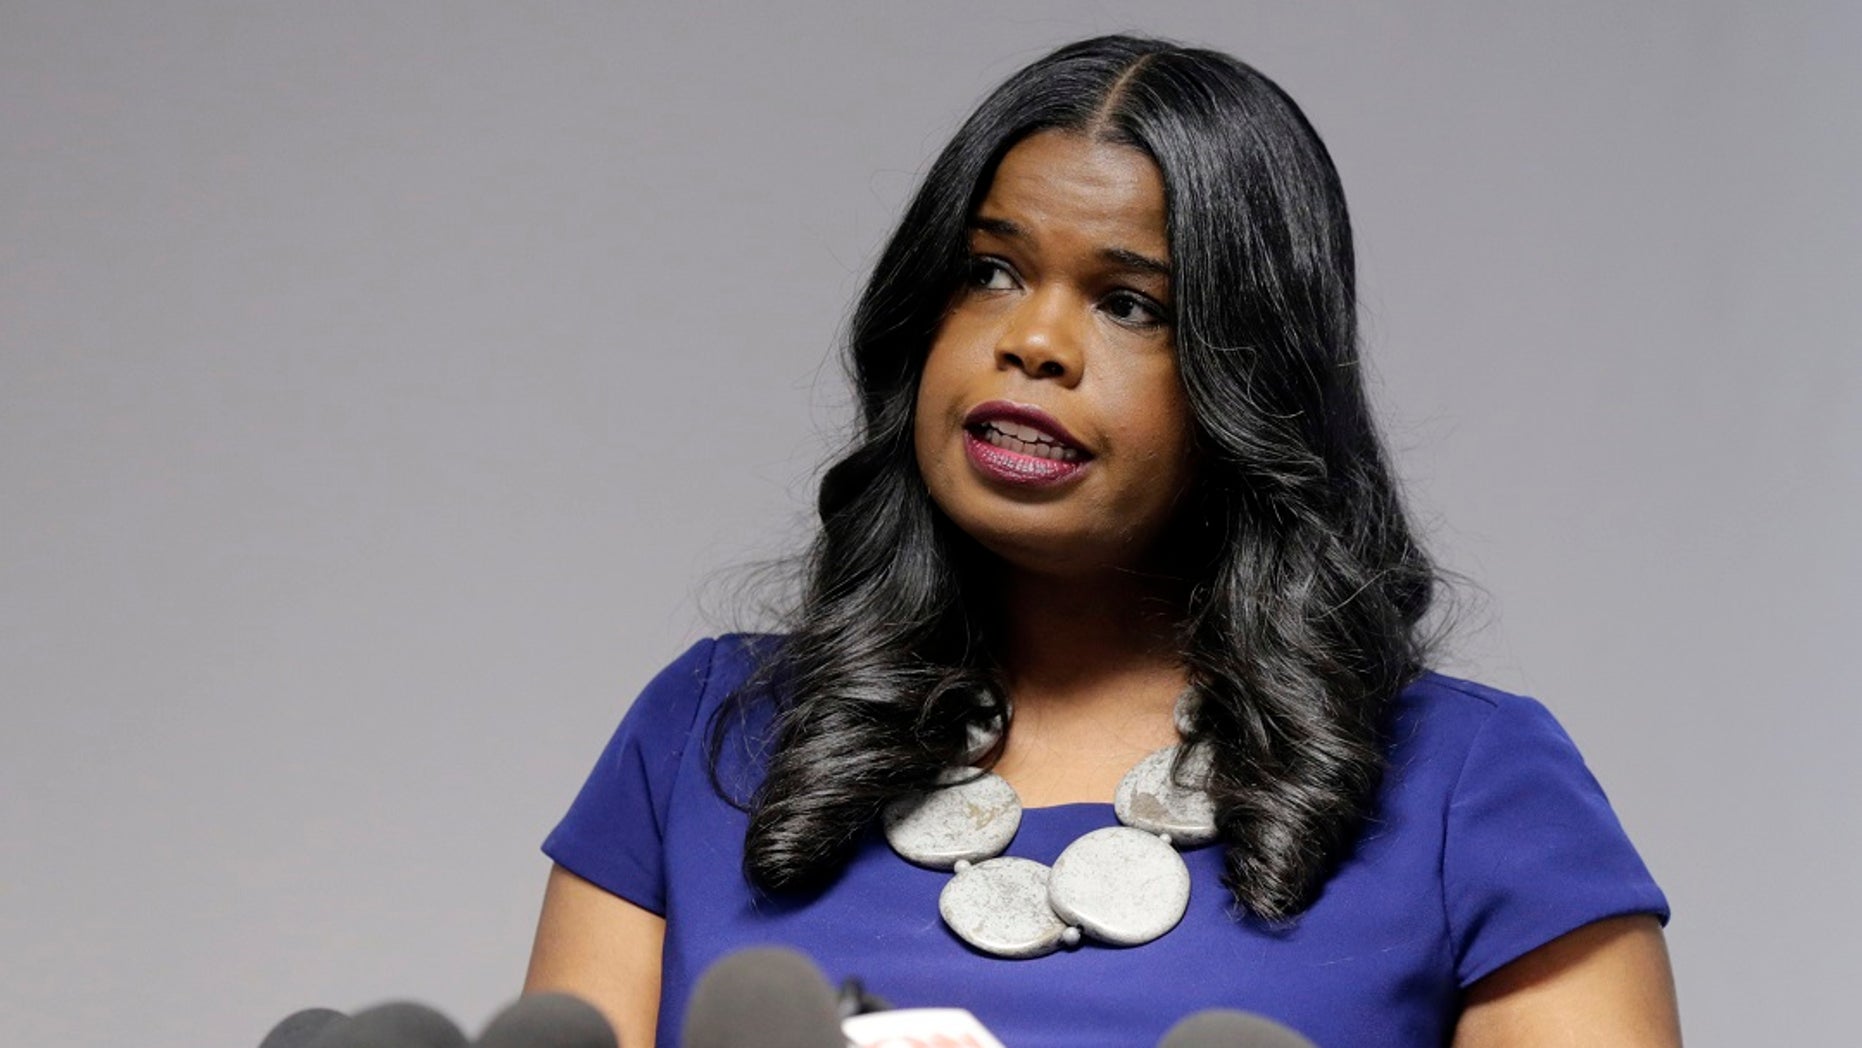 Lawyer Kim Foxx, of Cook County State, speaks at a press conference in Chicago. Foxx asked the County Inspector General to review how his office dealt with 